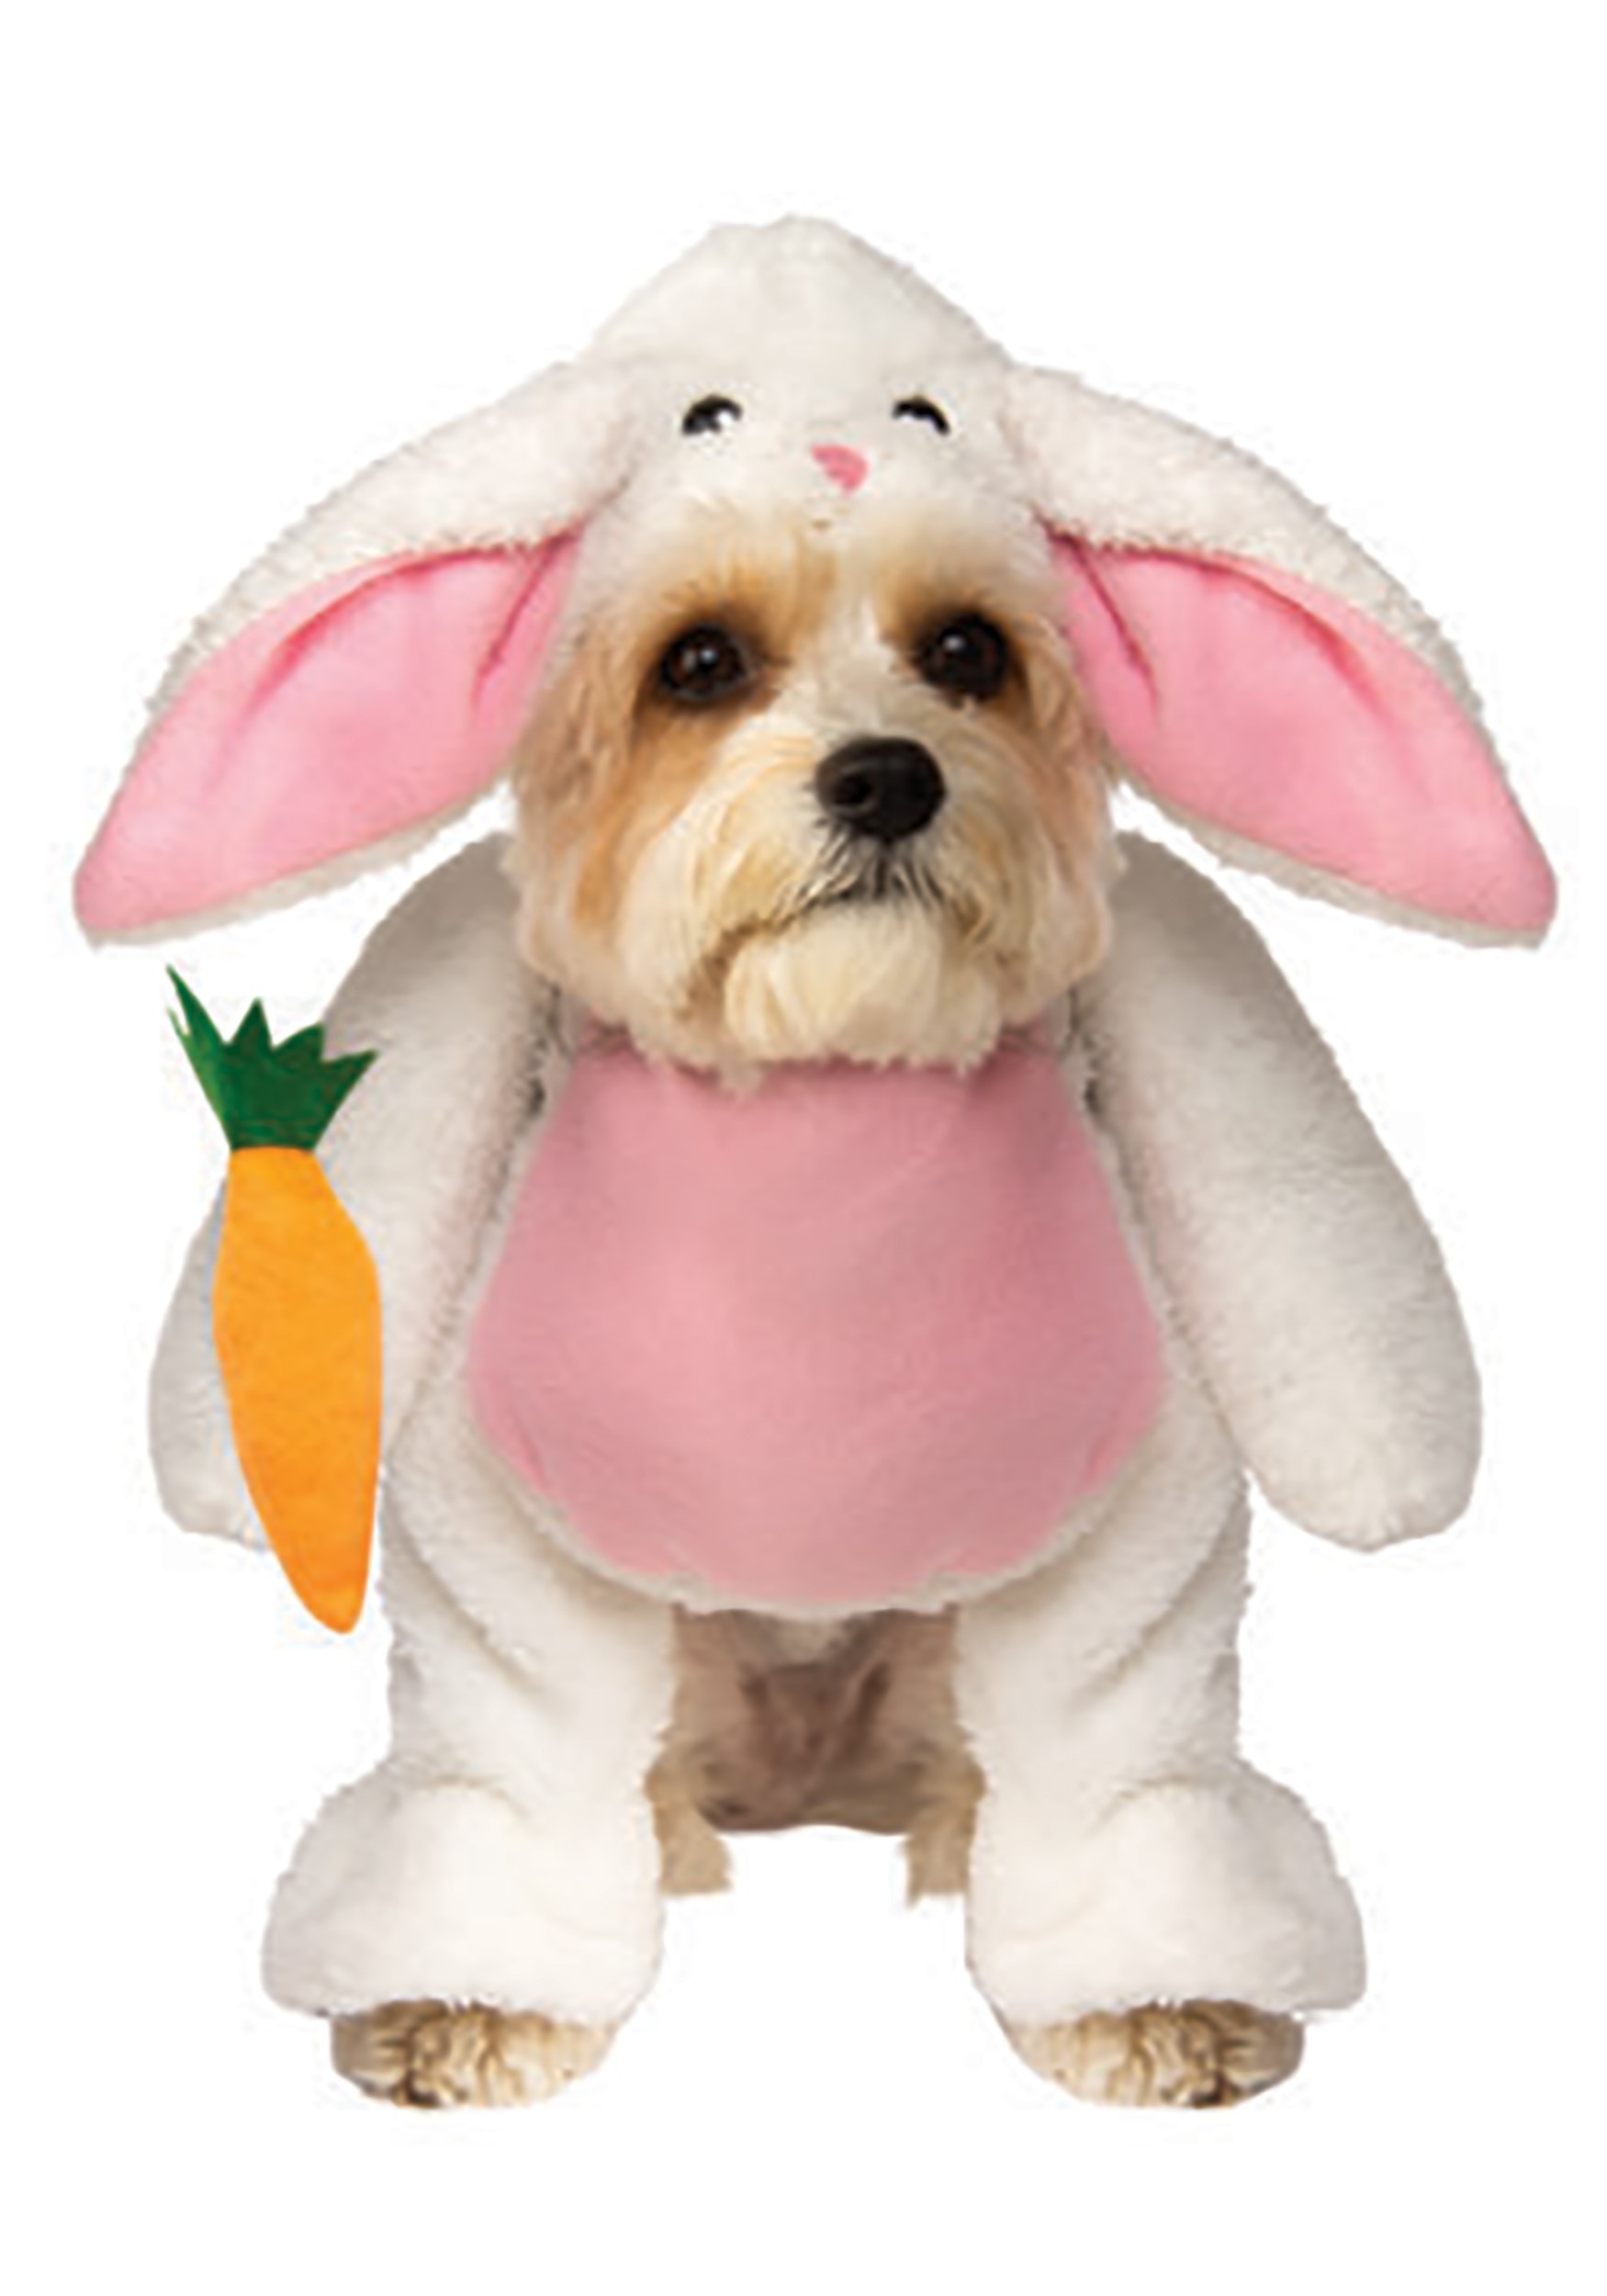 Photos - Fancy Dress Rubies Costume Co. Inc Hopping Bunny Costume for Pets Pink/White RU200 